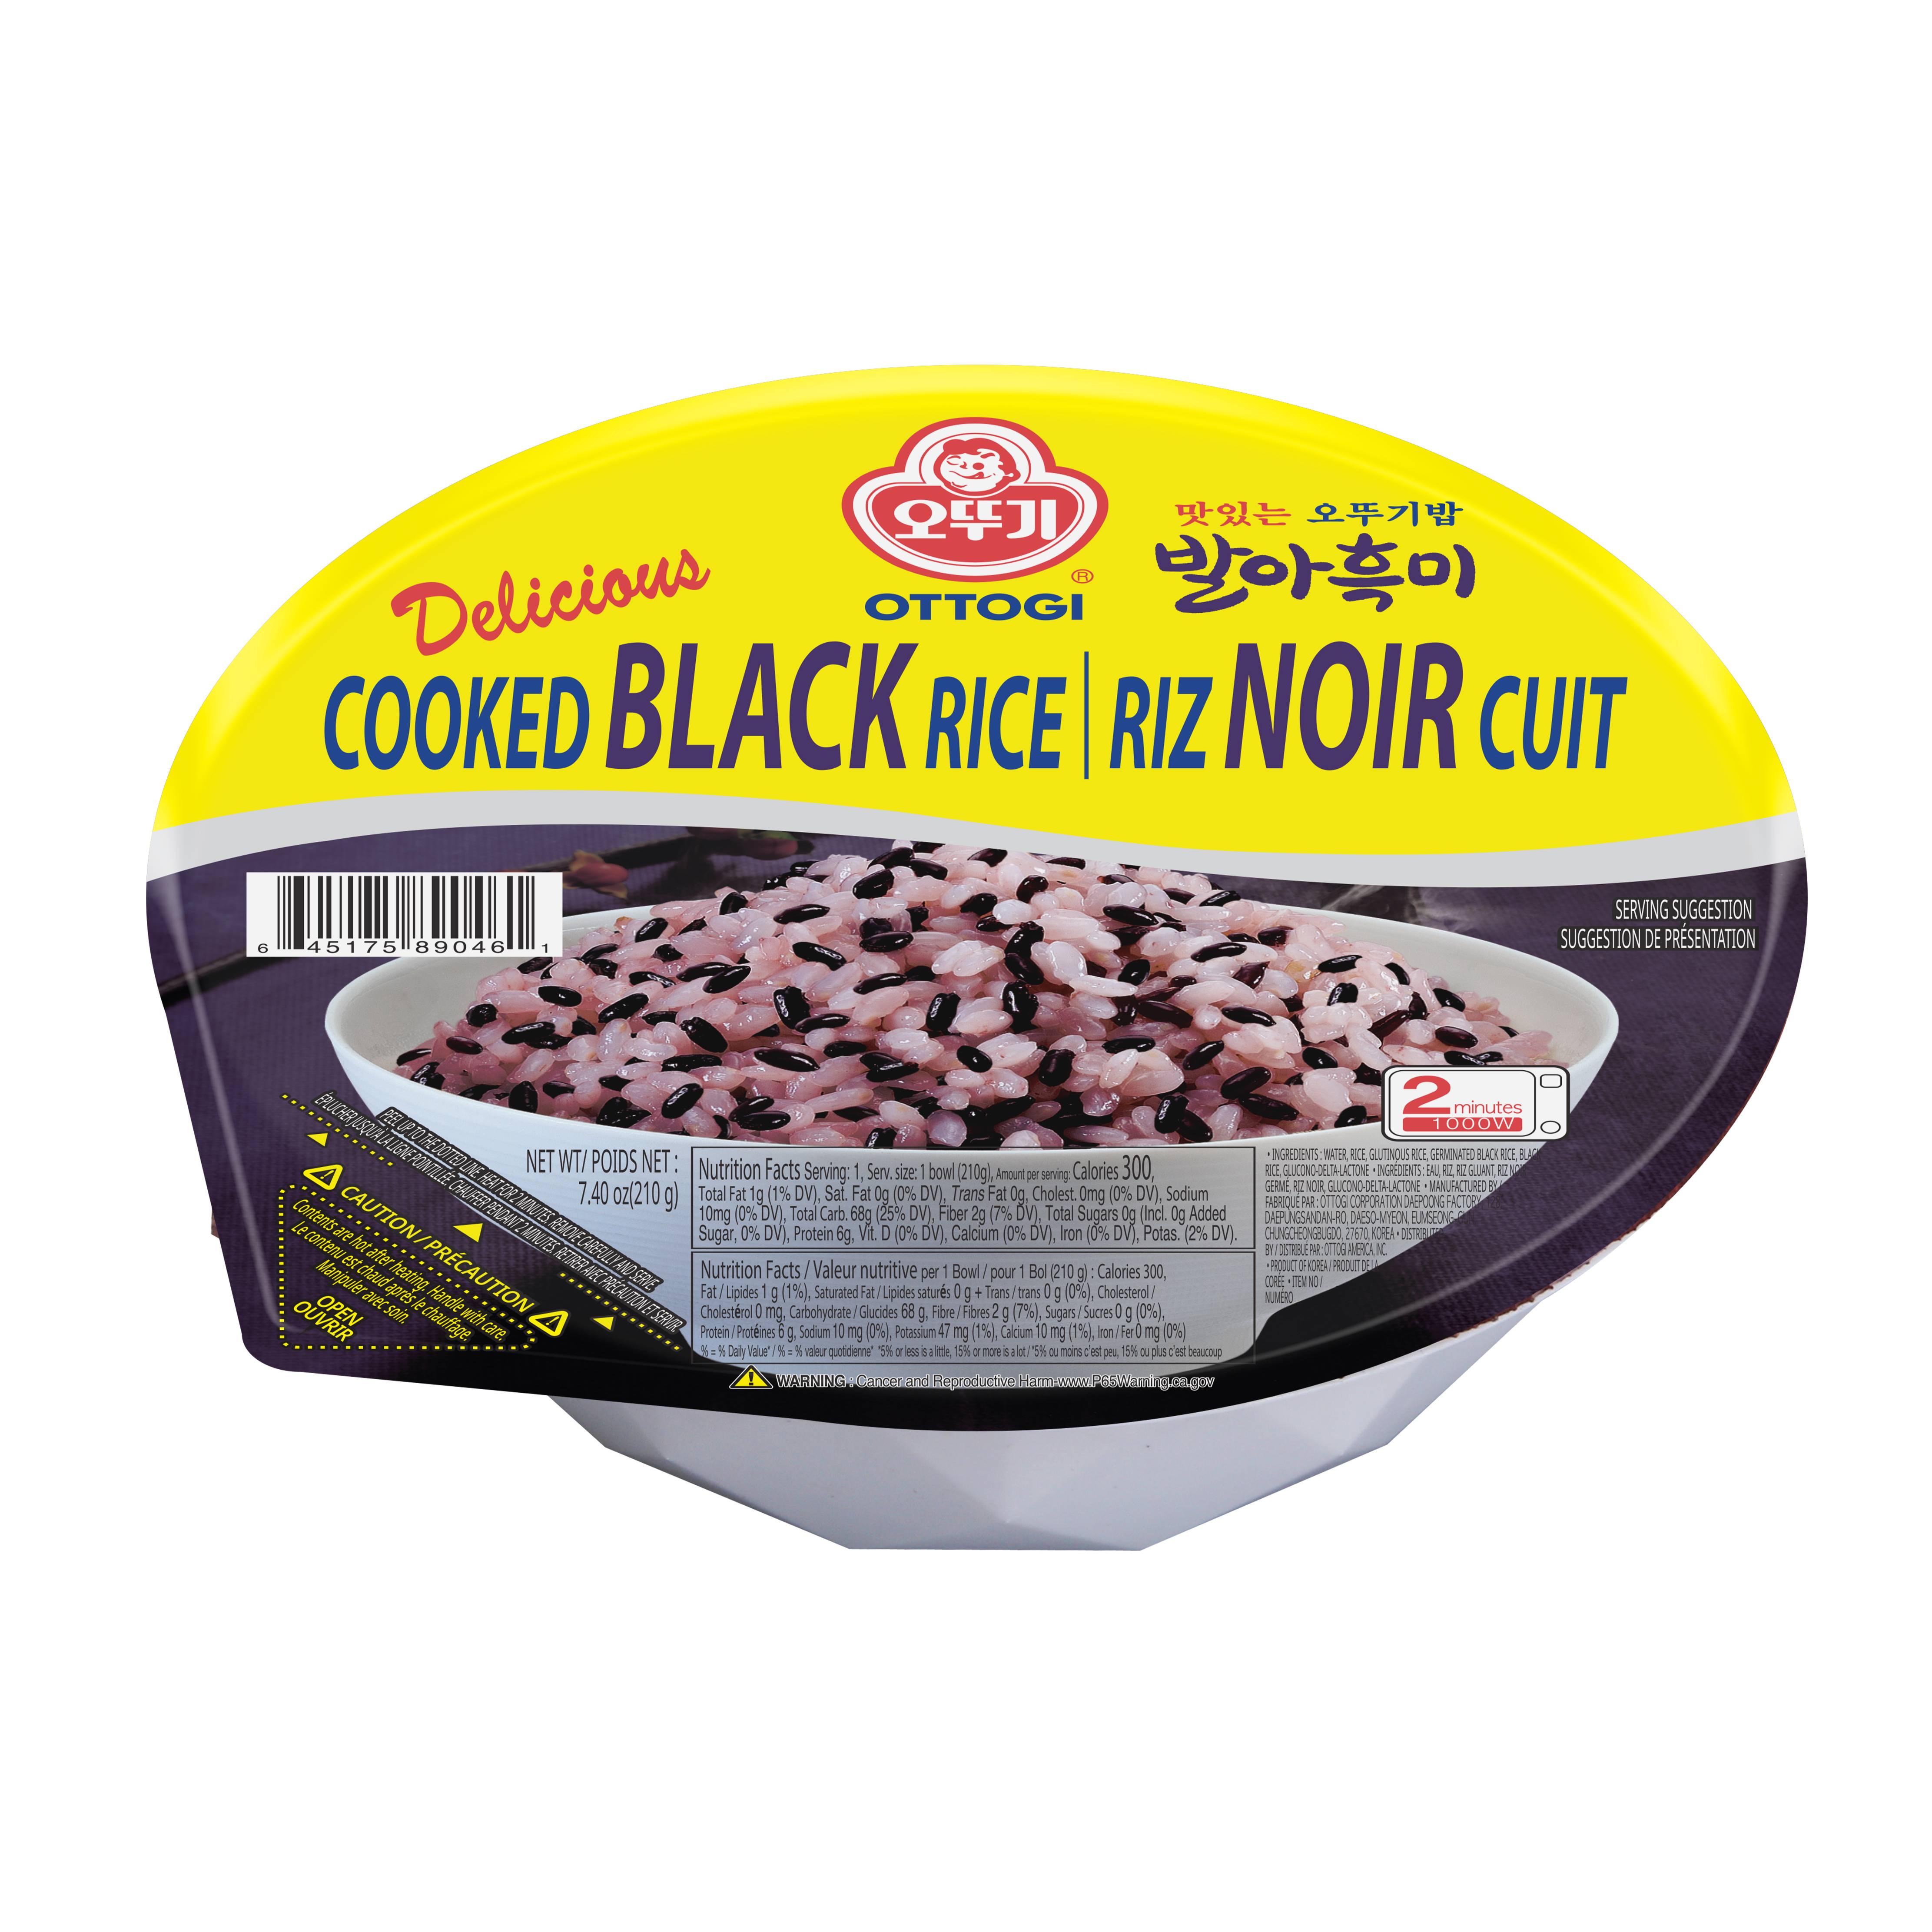 GERMINATED BLACK COOKED RICE